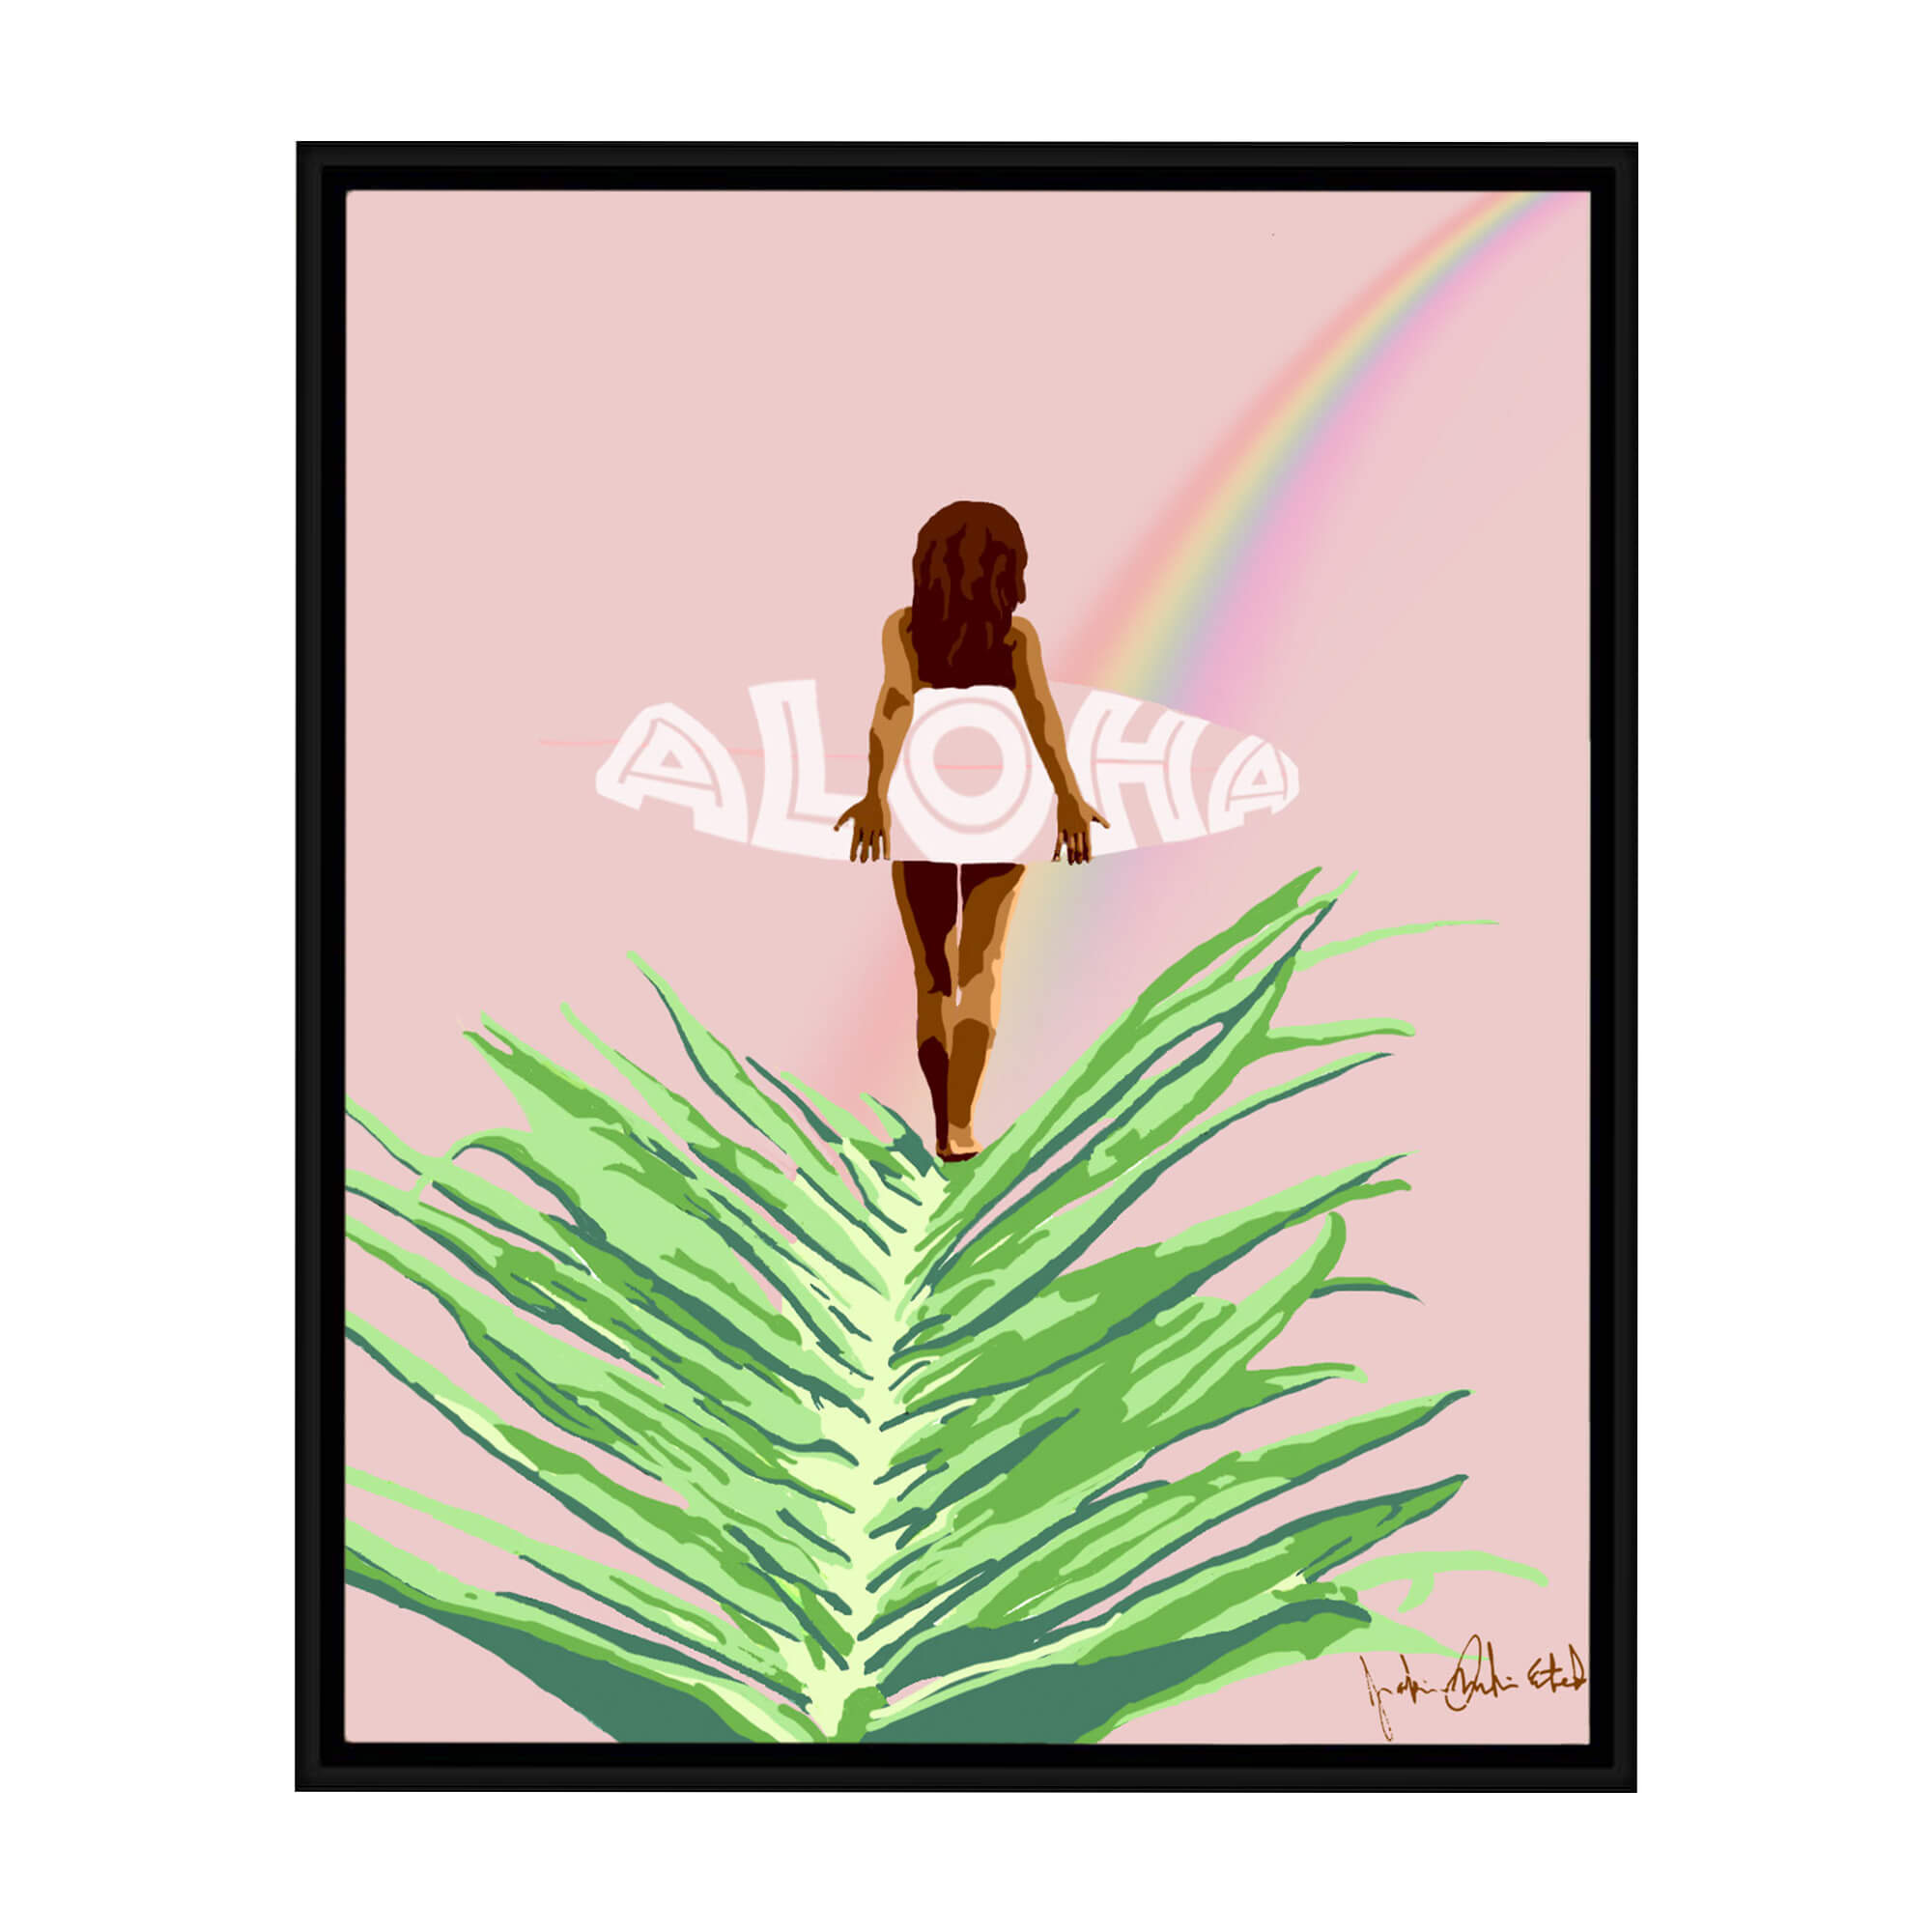 A framed canvas giclée print featuring a woman holding a surfboard following a beautiful rainbow on a pastel pink background by Hawaii artist Jackie Eitel